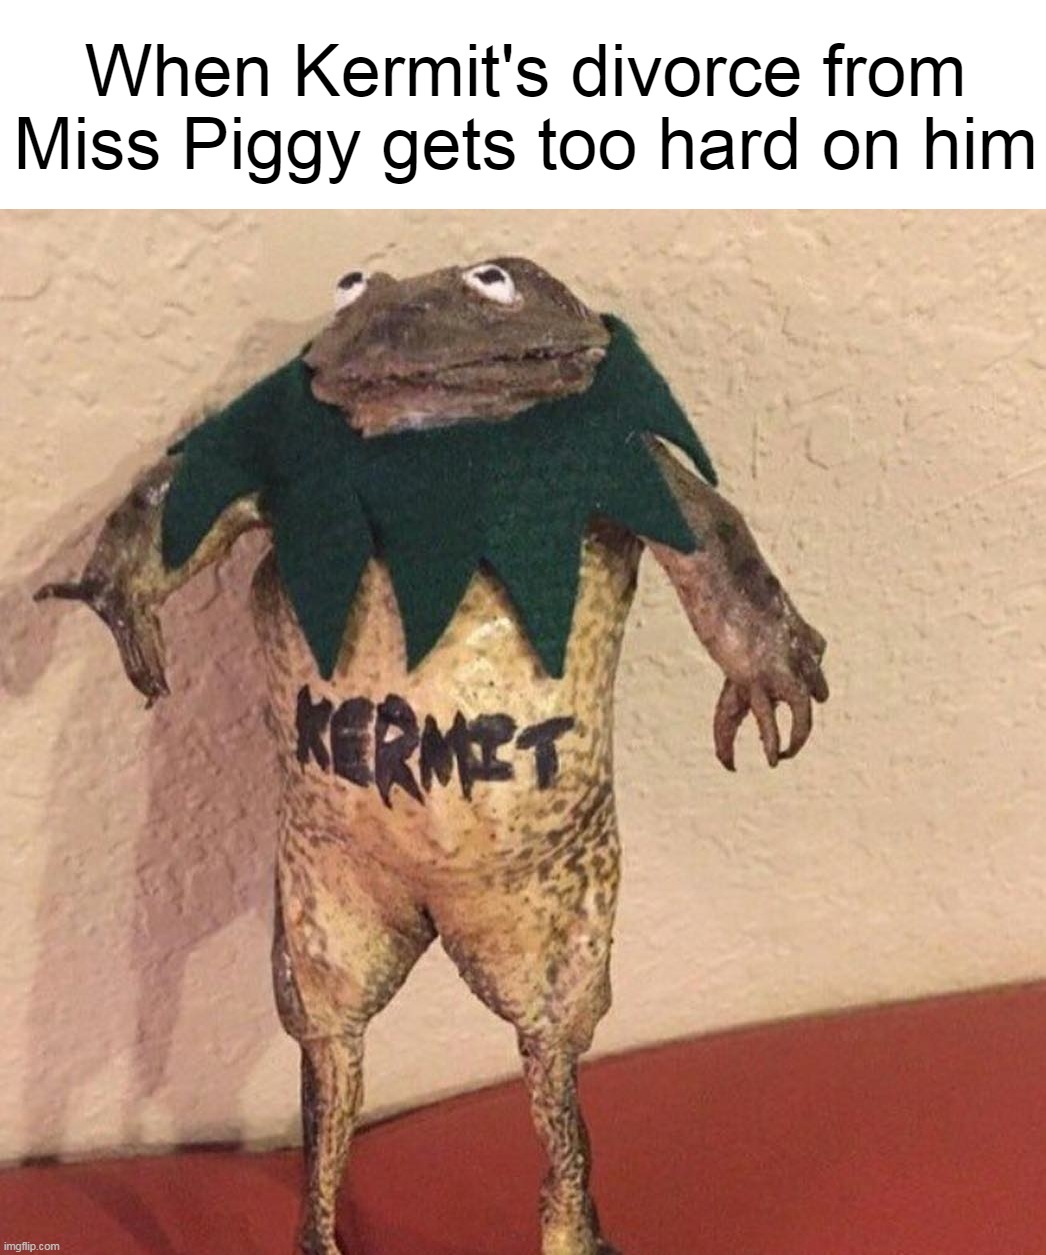 When Kermit's divorce from Miss Piggy gets too hard on him | image tagged in meme,memes,funny,dank memes | made w/ Imgflip meme maker